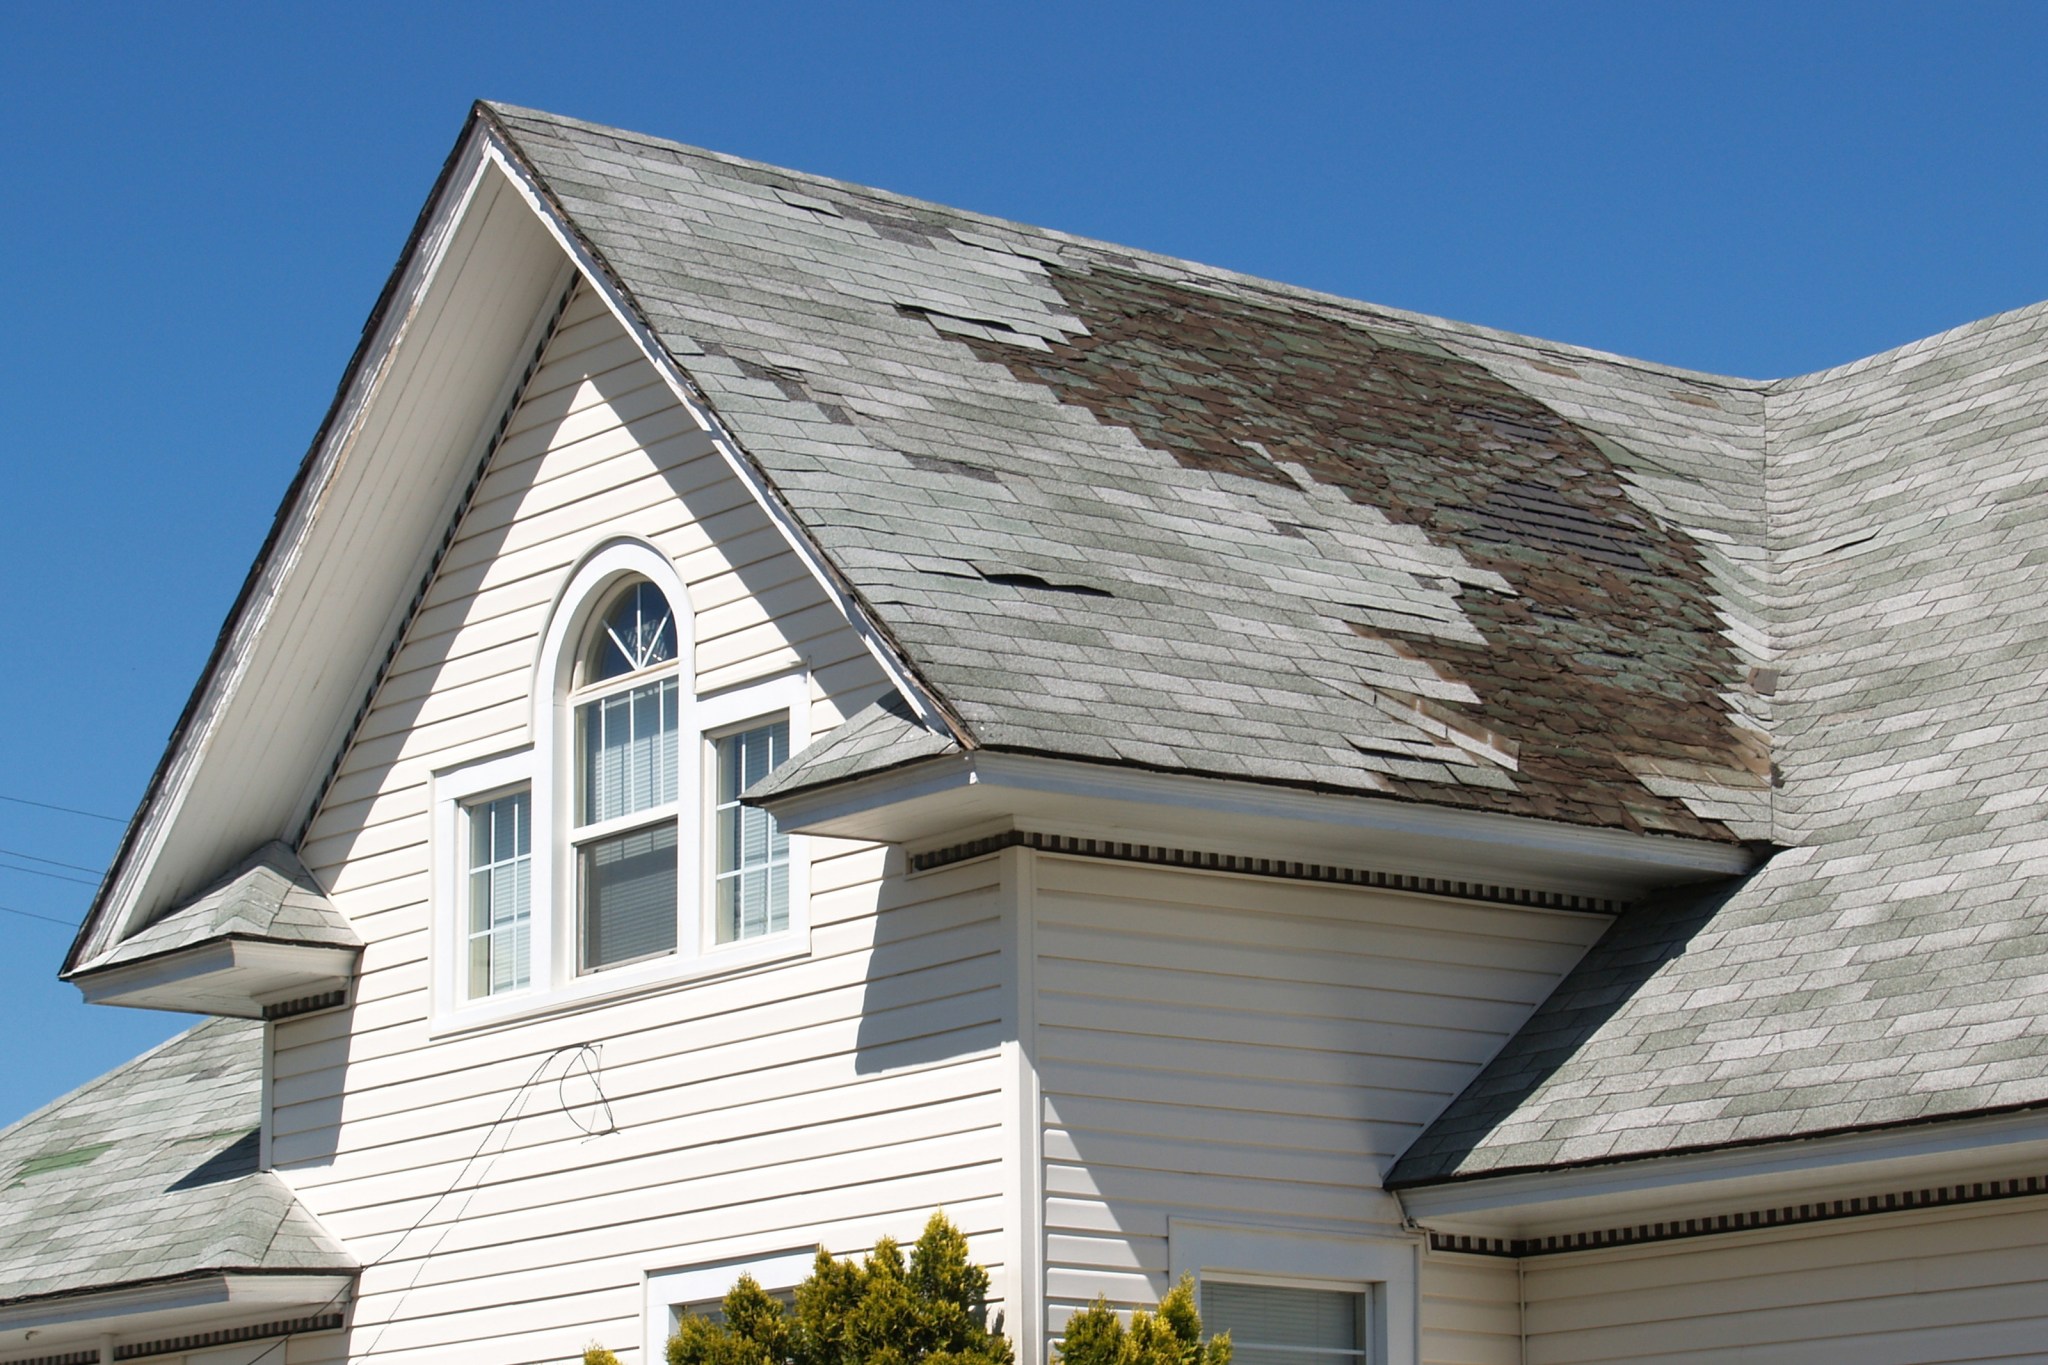 How to Negotiate Roof Replacement With Insurance: Smart Tactics